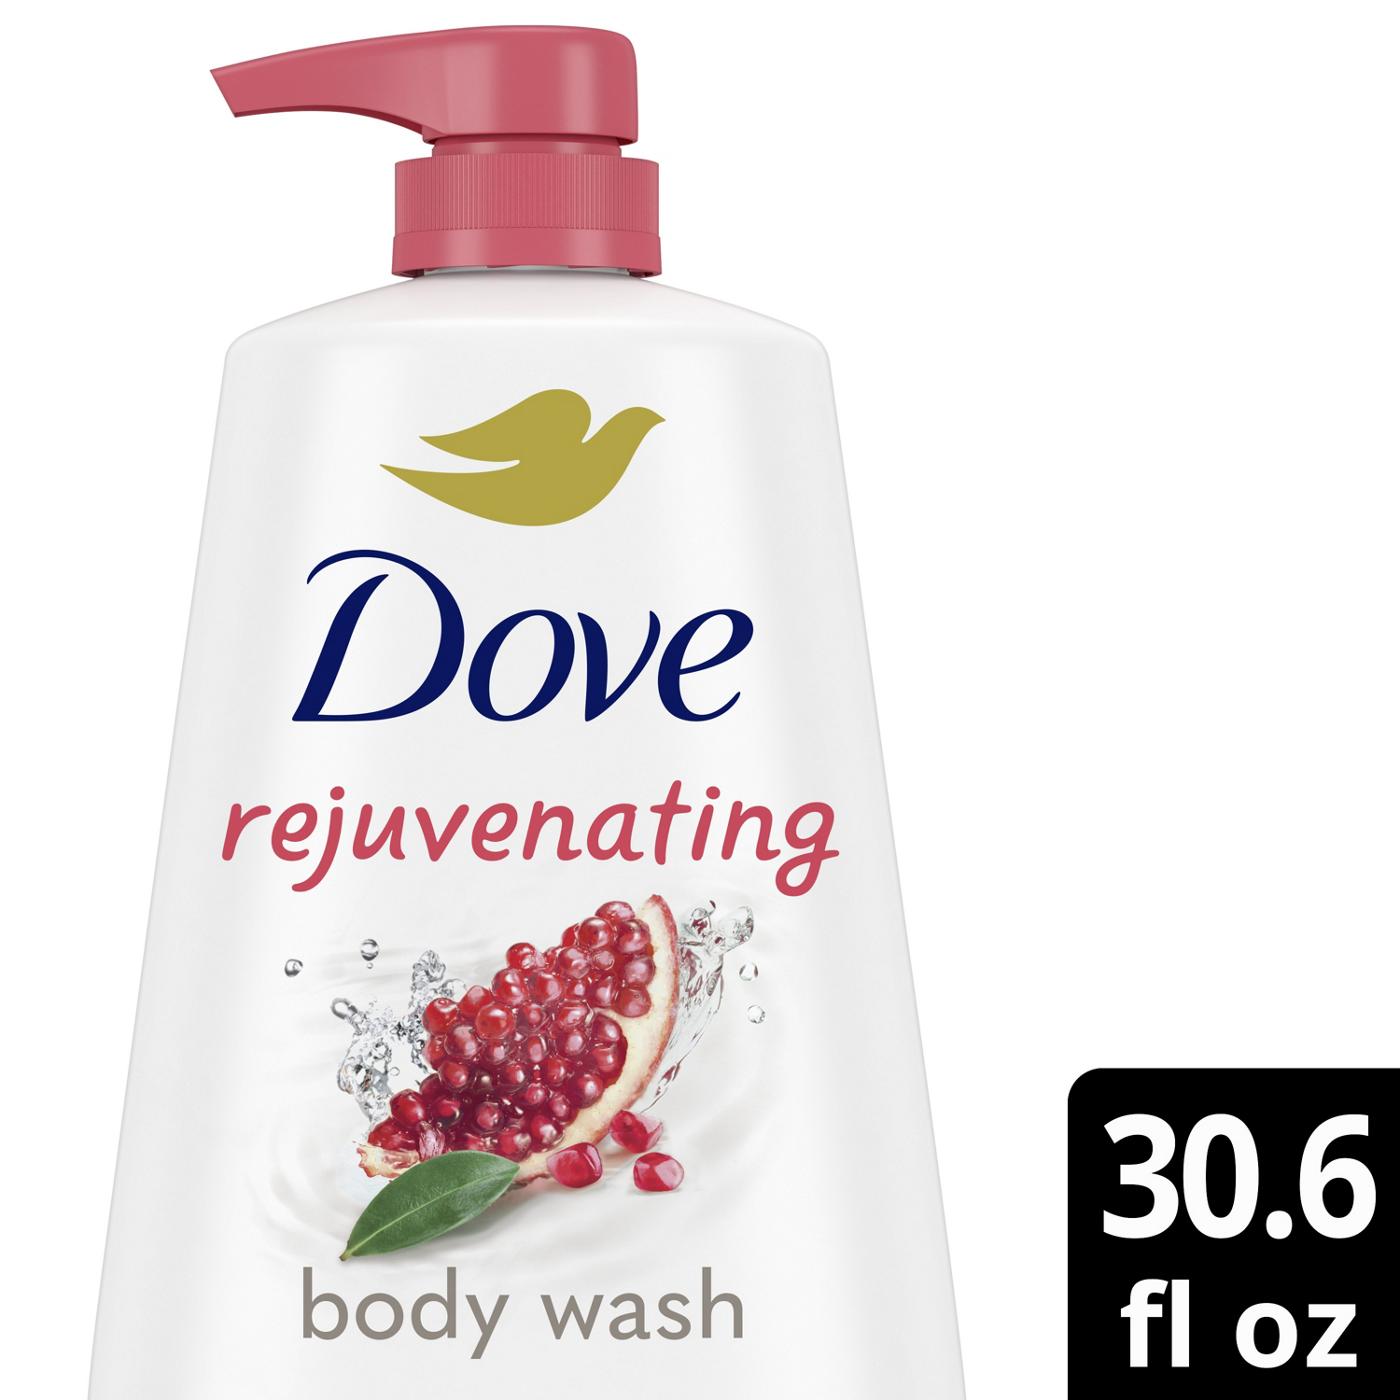 Dove Rejuvenating Body Wash with Pump - Pomegranate & Hibiscus; image 6 of 9